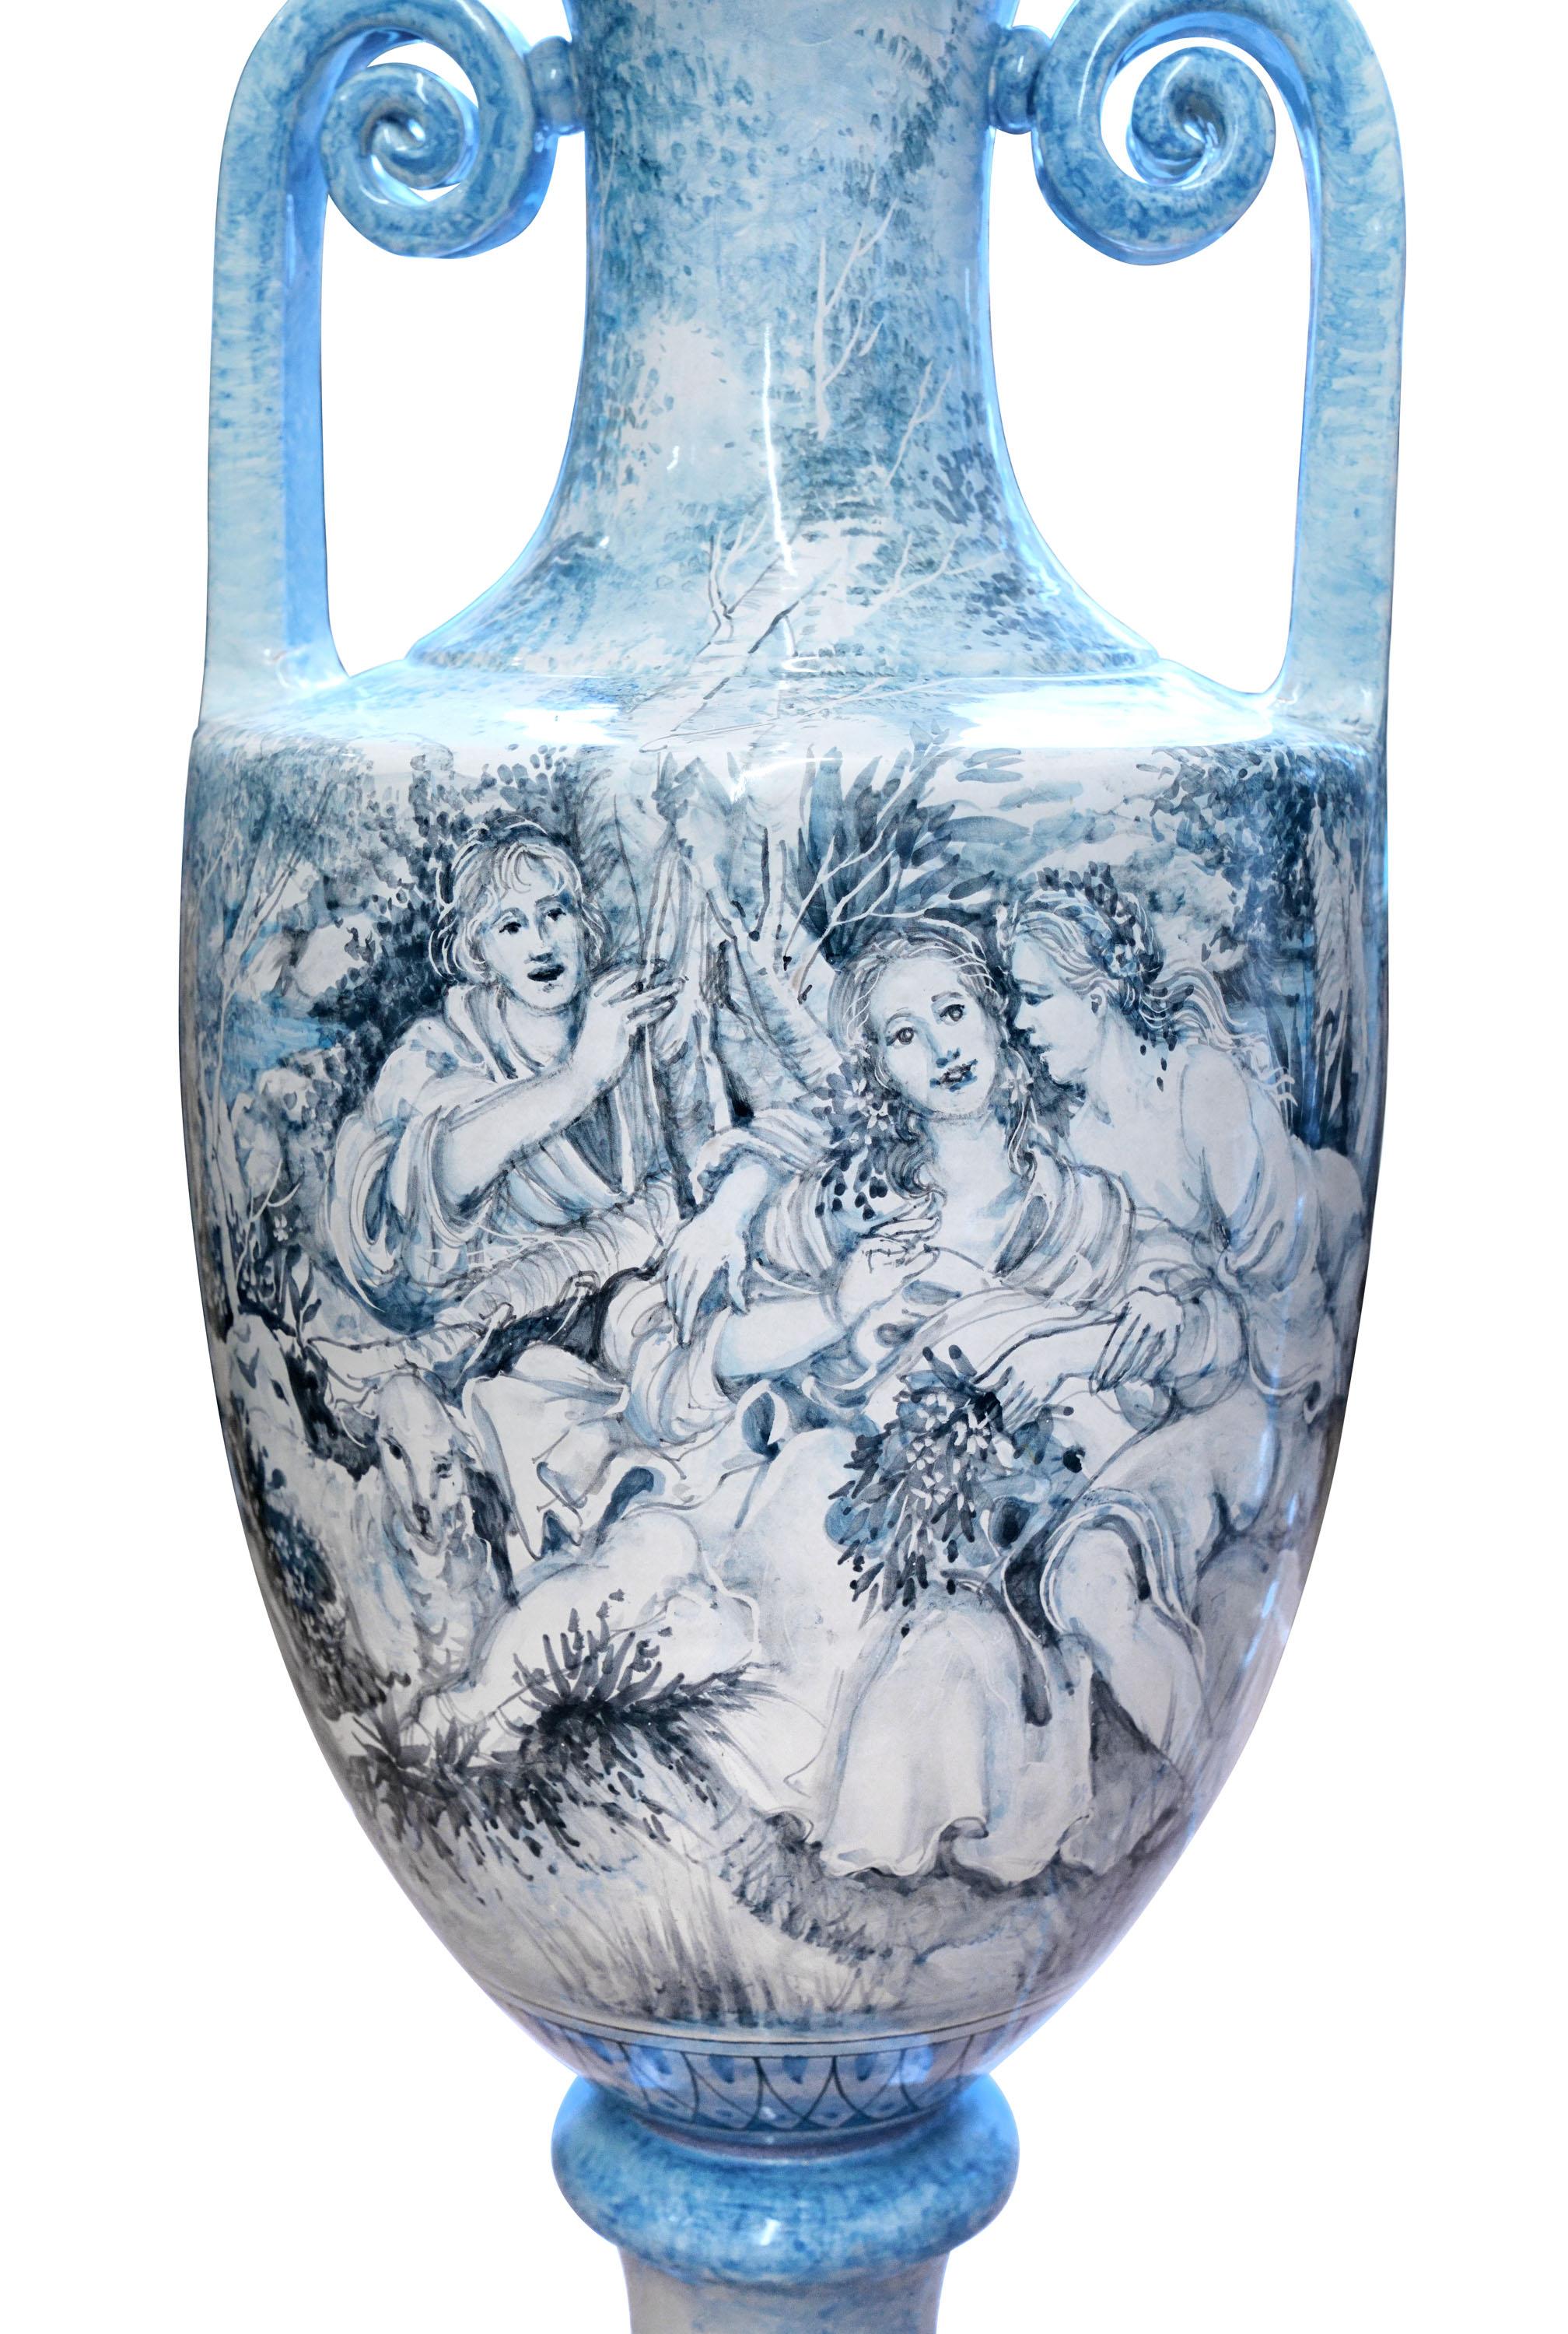 Large ceramic amphora with handles, made and painted entirely by hand, central Italy production, year 2009. The decoration on the vase is a reproduction of a painting by Francois Boucher made with great detail using light blue and light